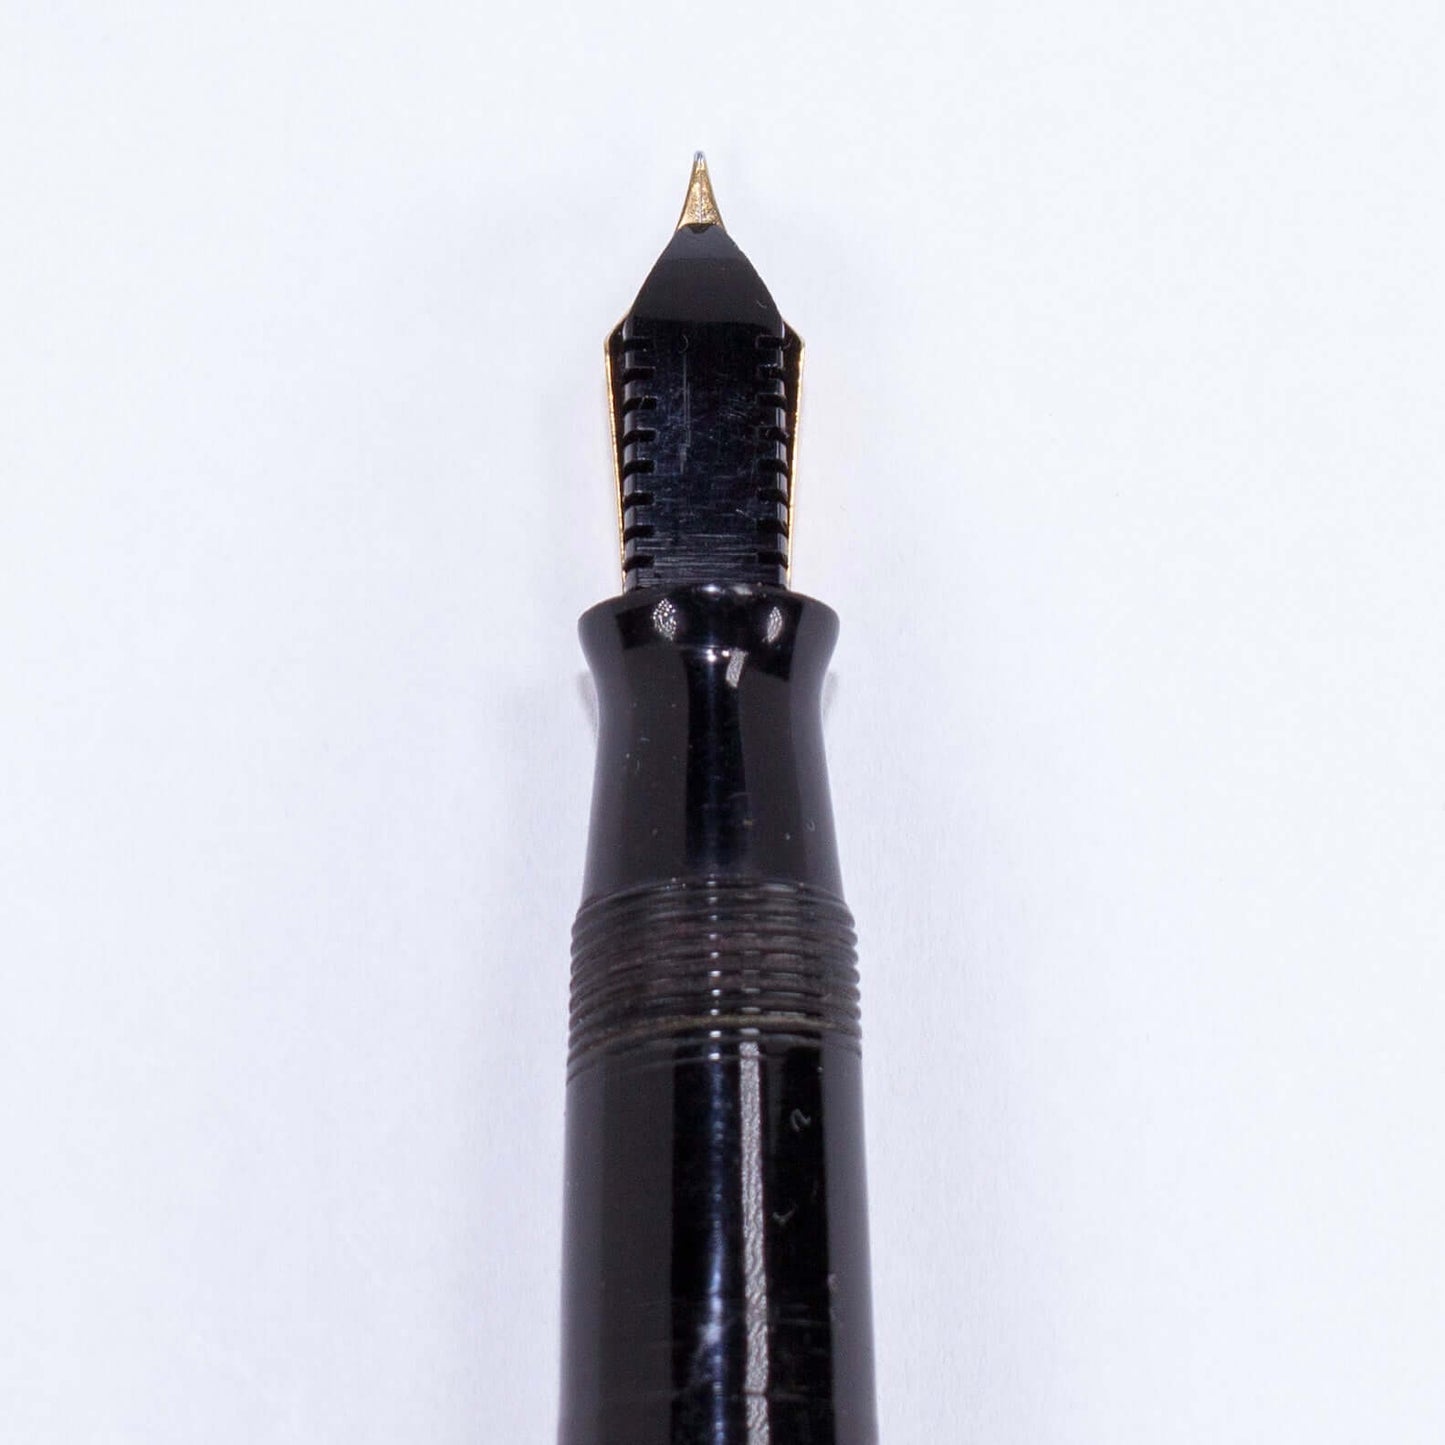 Parker Vacumatic Debutante Vintage Fountain Pen, 14K Fine Nib.Name/Type: Parker Vacumatic Debutante Fountain Pen, 14K Fine Nib Manufacture Year: 1944 Length: 4 7/8 Filling System: Restored Vacumatic with plastic plunger Color/Pattern: Laminated Black Nib